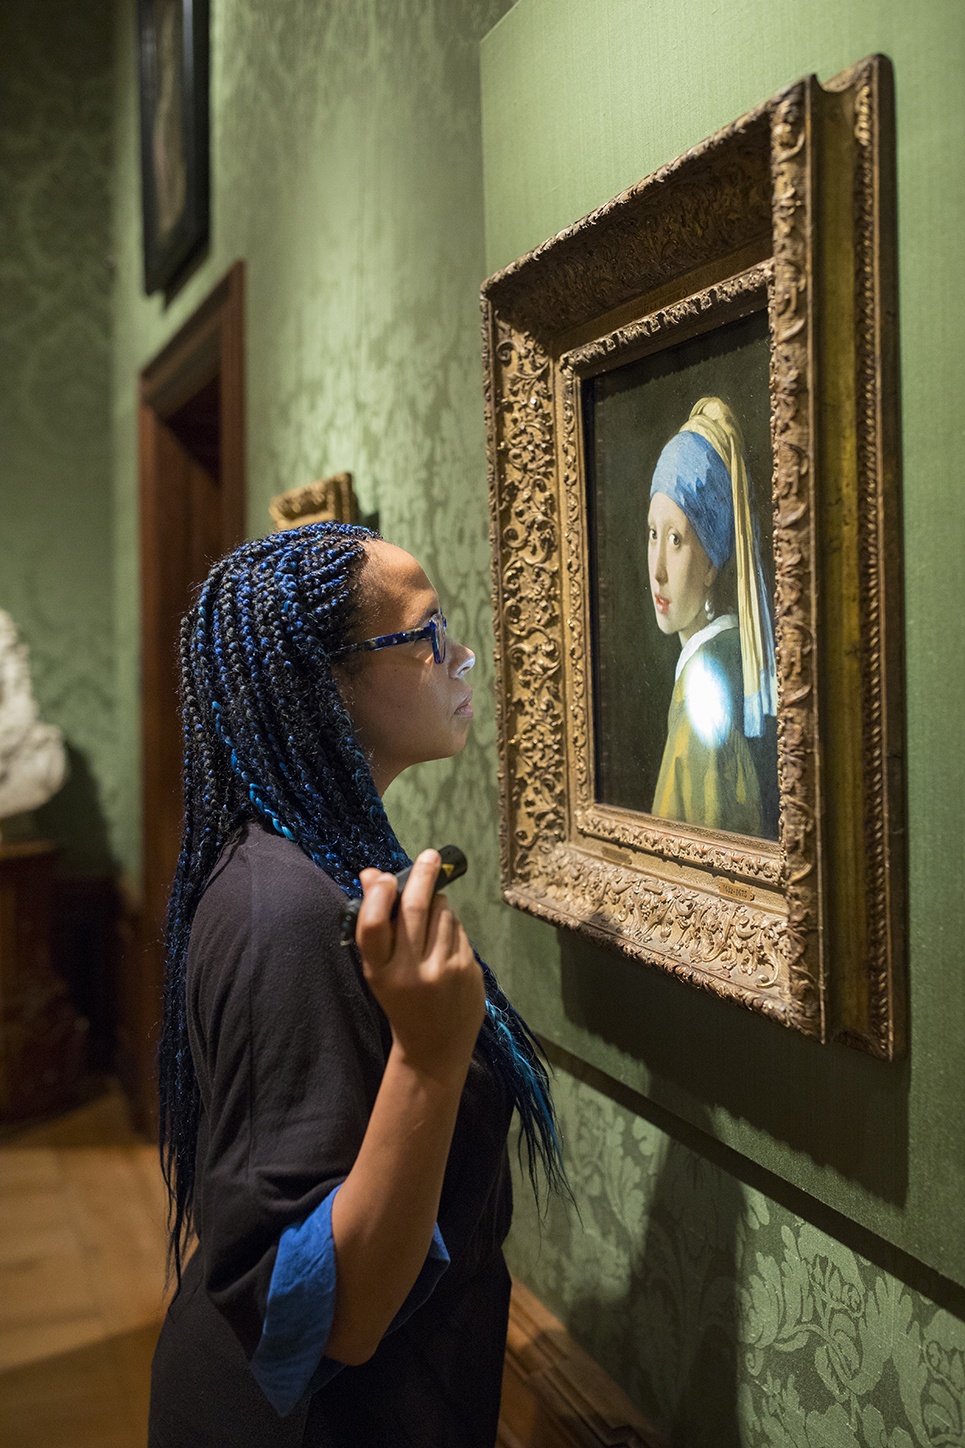 Vermeer girl with a pearl earring analysis